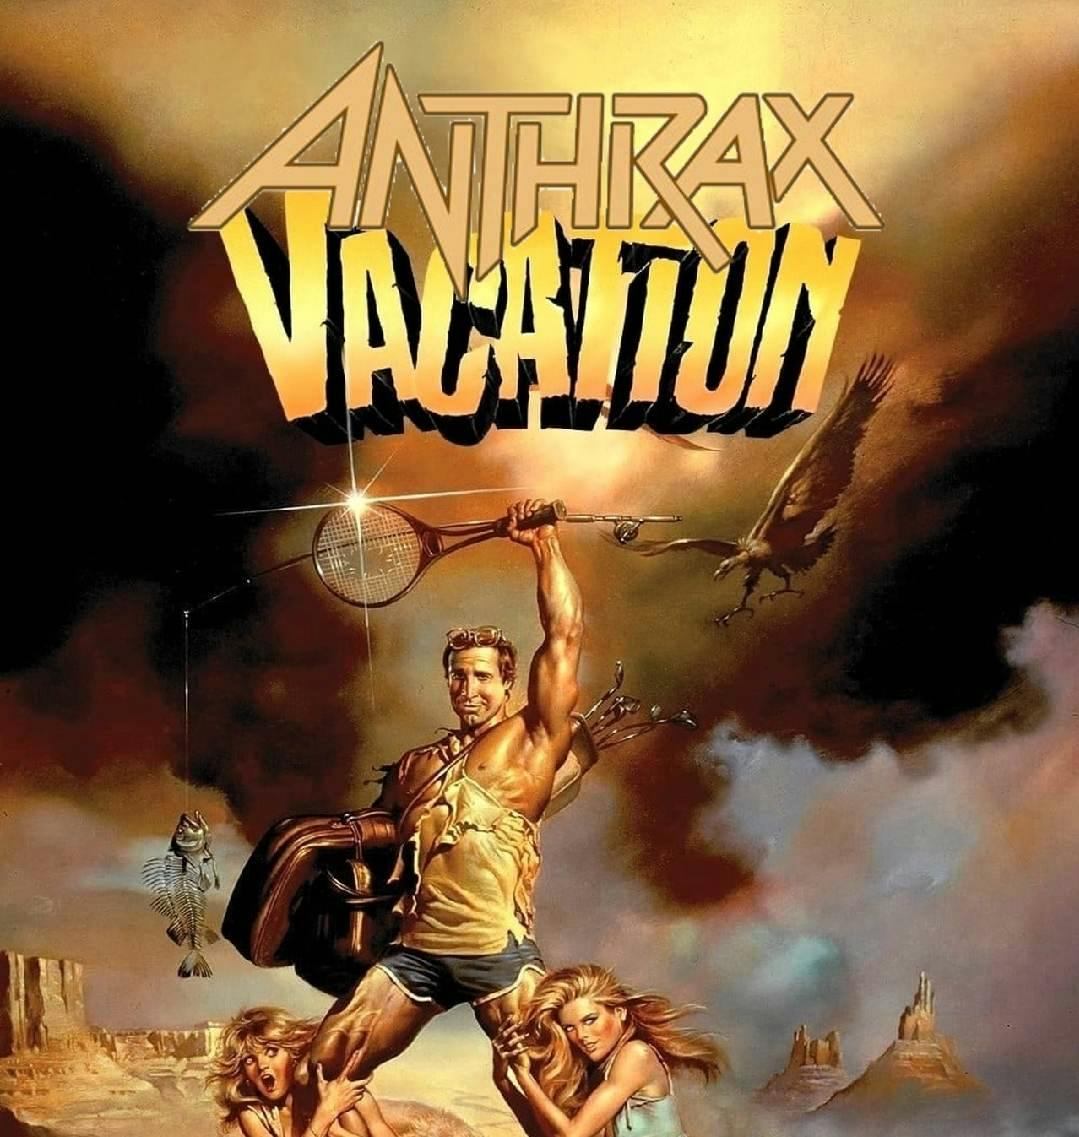 Ep 295: National Lampoon’s Anthrax Vacation